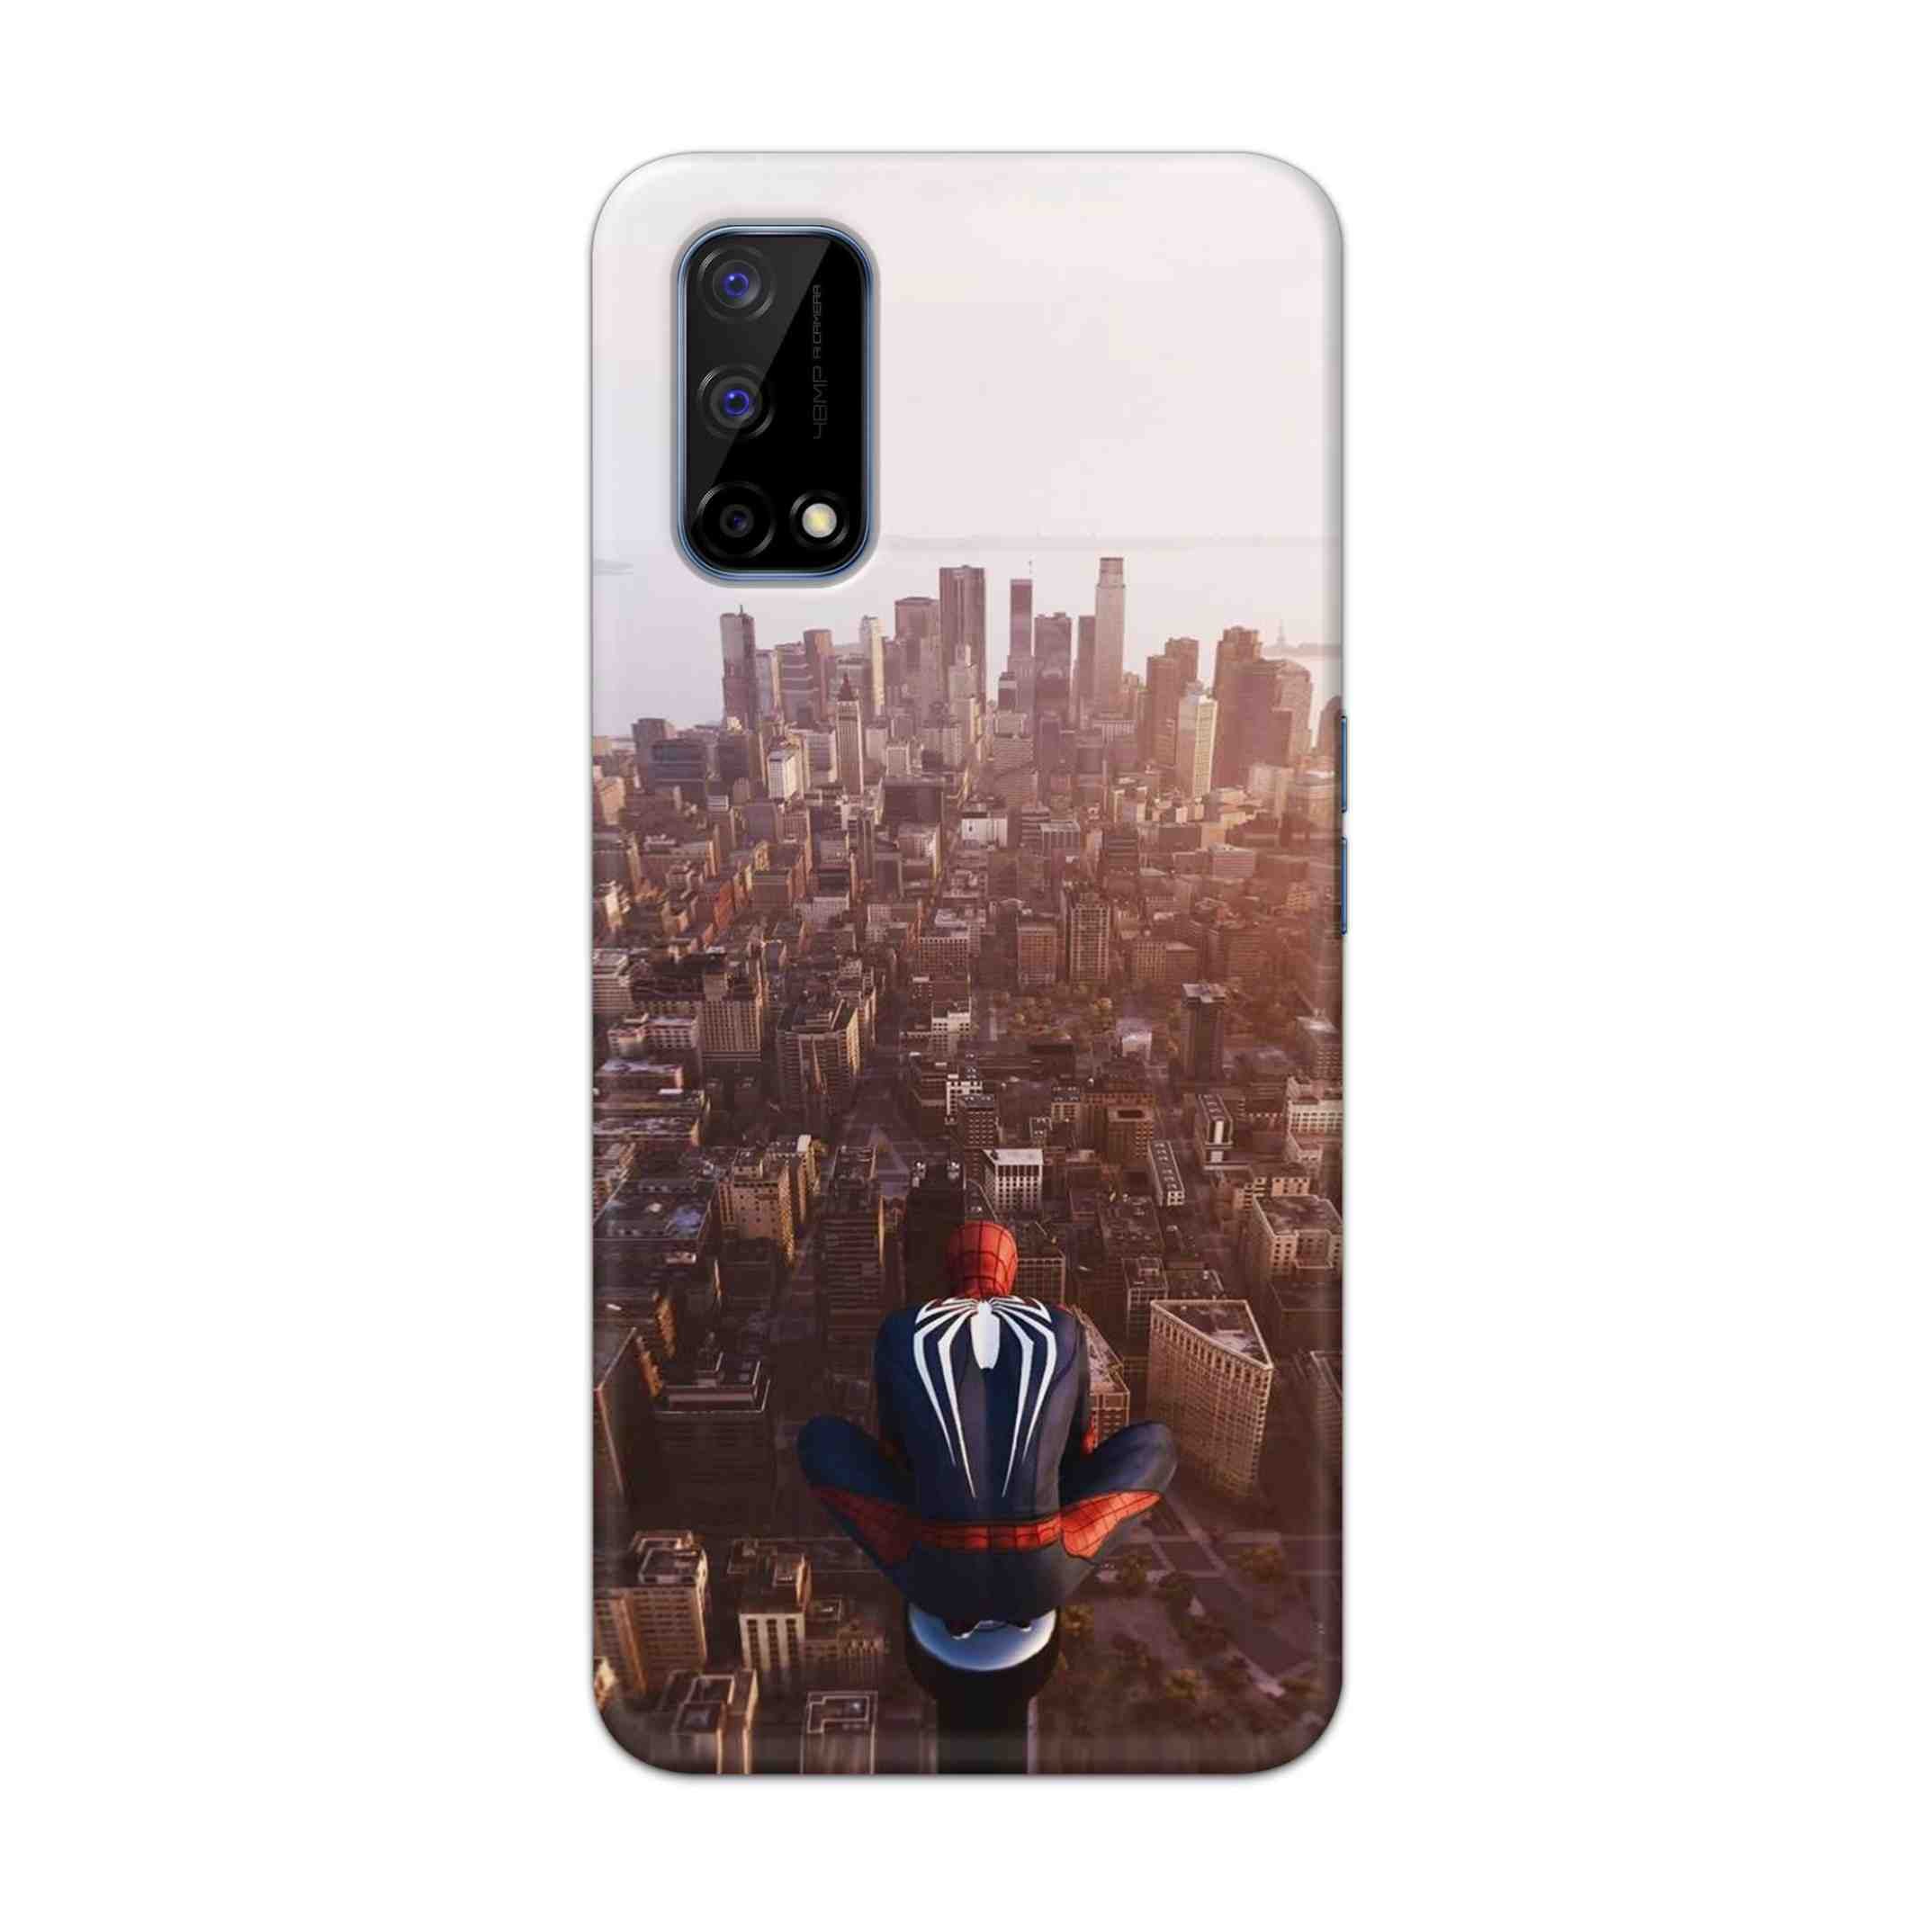 Buy City Of Spiderman Hard Back Mobile Phone Case Cover For Realme Narzo 30 Pro Online